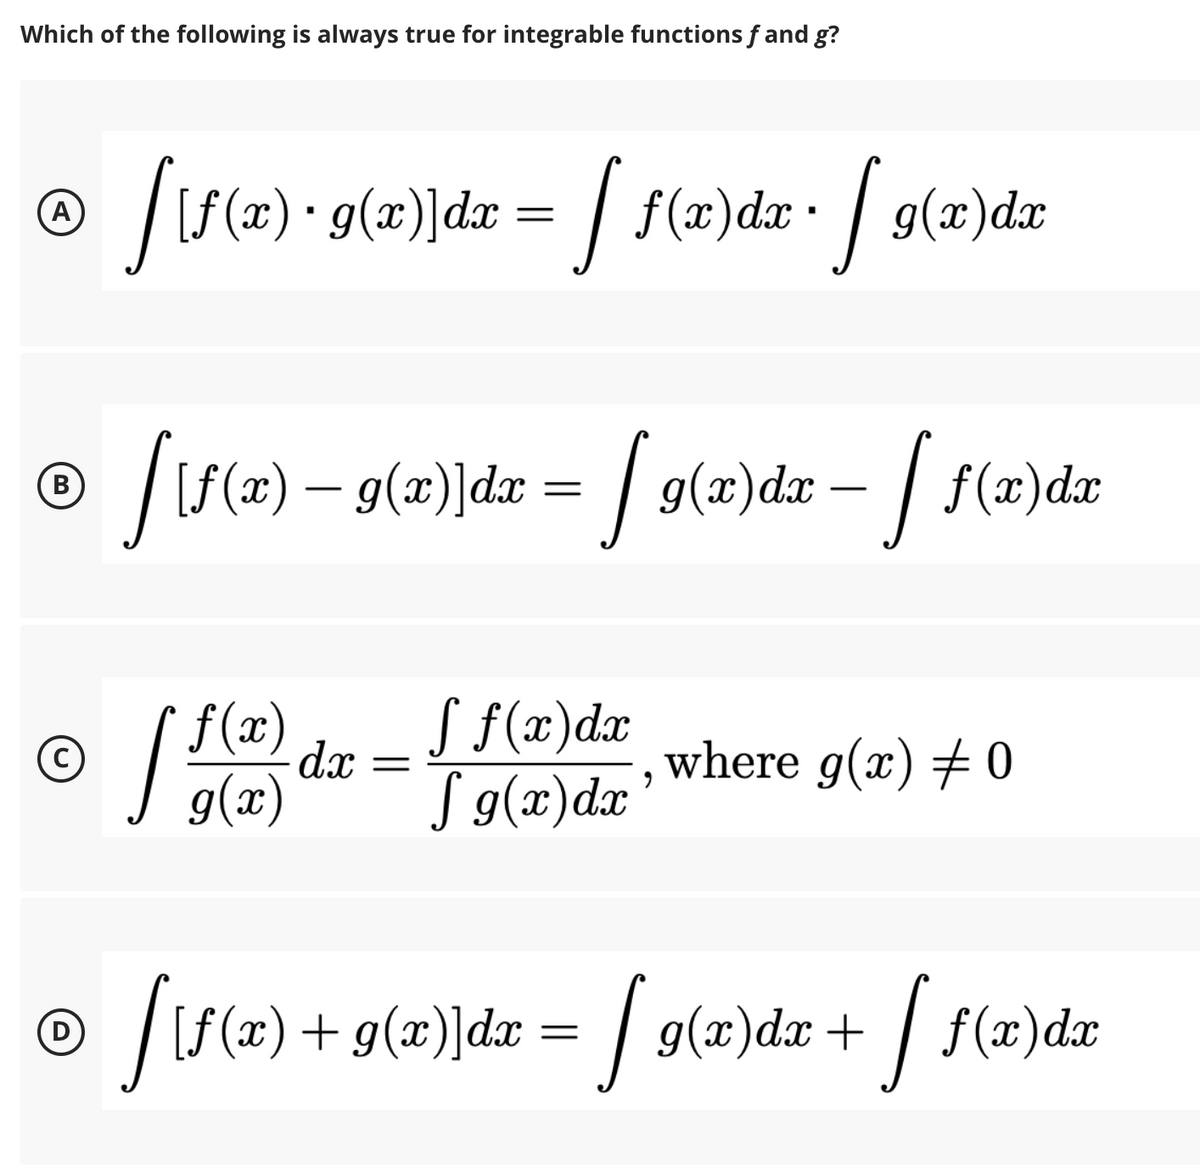 Which of the following is always true for integrable functions f and g?
|S (#) • g(æ)]dx = / f(#)dx• | g(x)dx
| f(2)dr• g(x)de
A
S(2)
- g(x)]dx = | g(x)dx – | f(x)dx
- /
В
f(x)
dx
S f(x)dx
where g(x) # 0
g(x)
J g(x)dx
+ g(x)]dx = / g(x)dæ + | f(æ)dx
D
